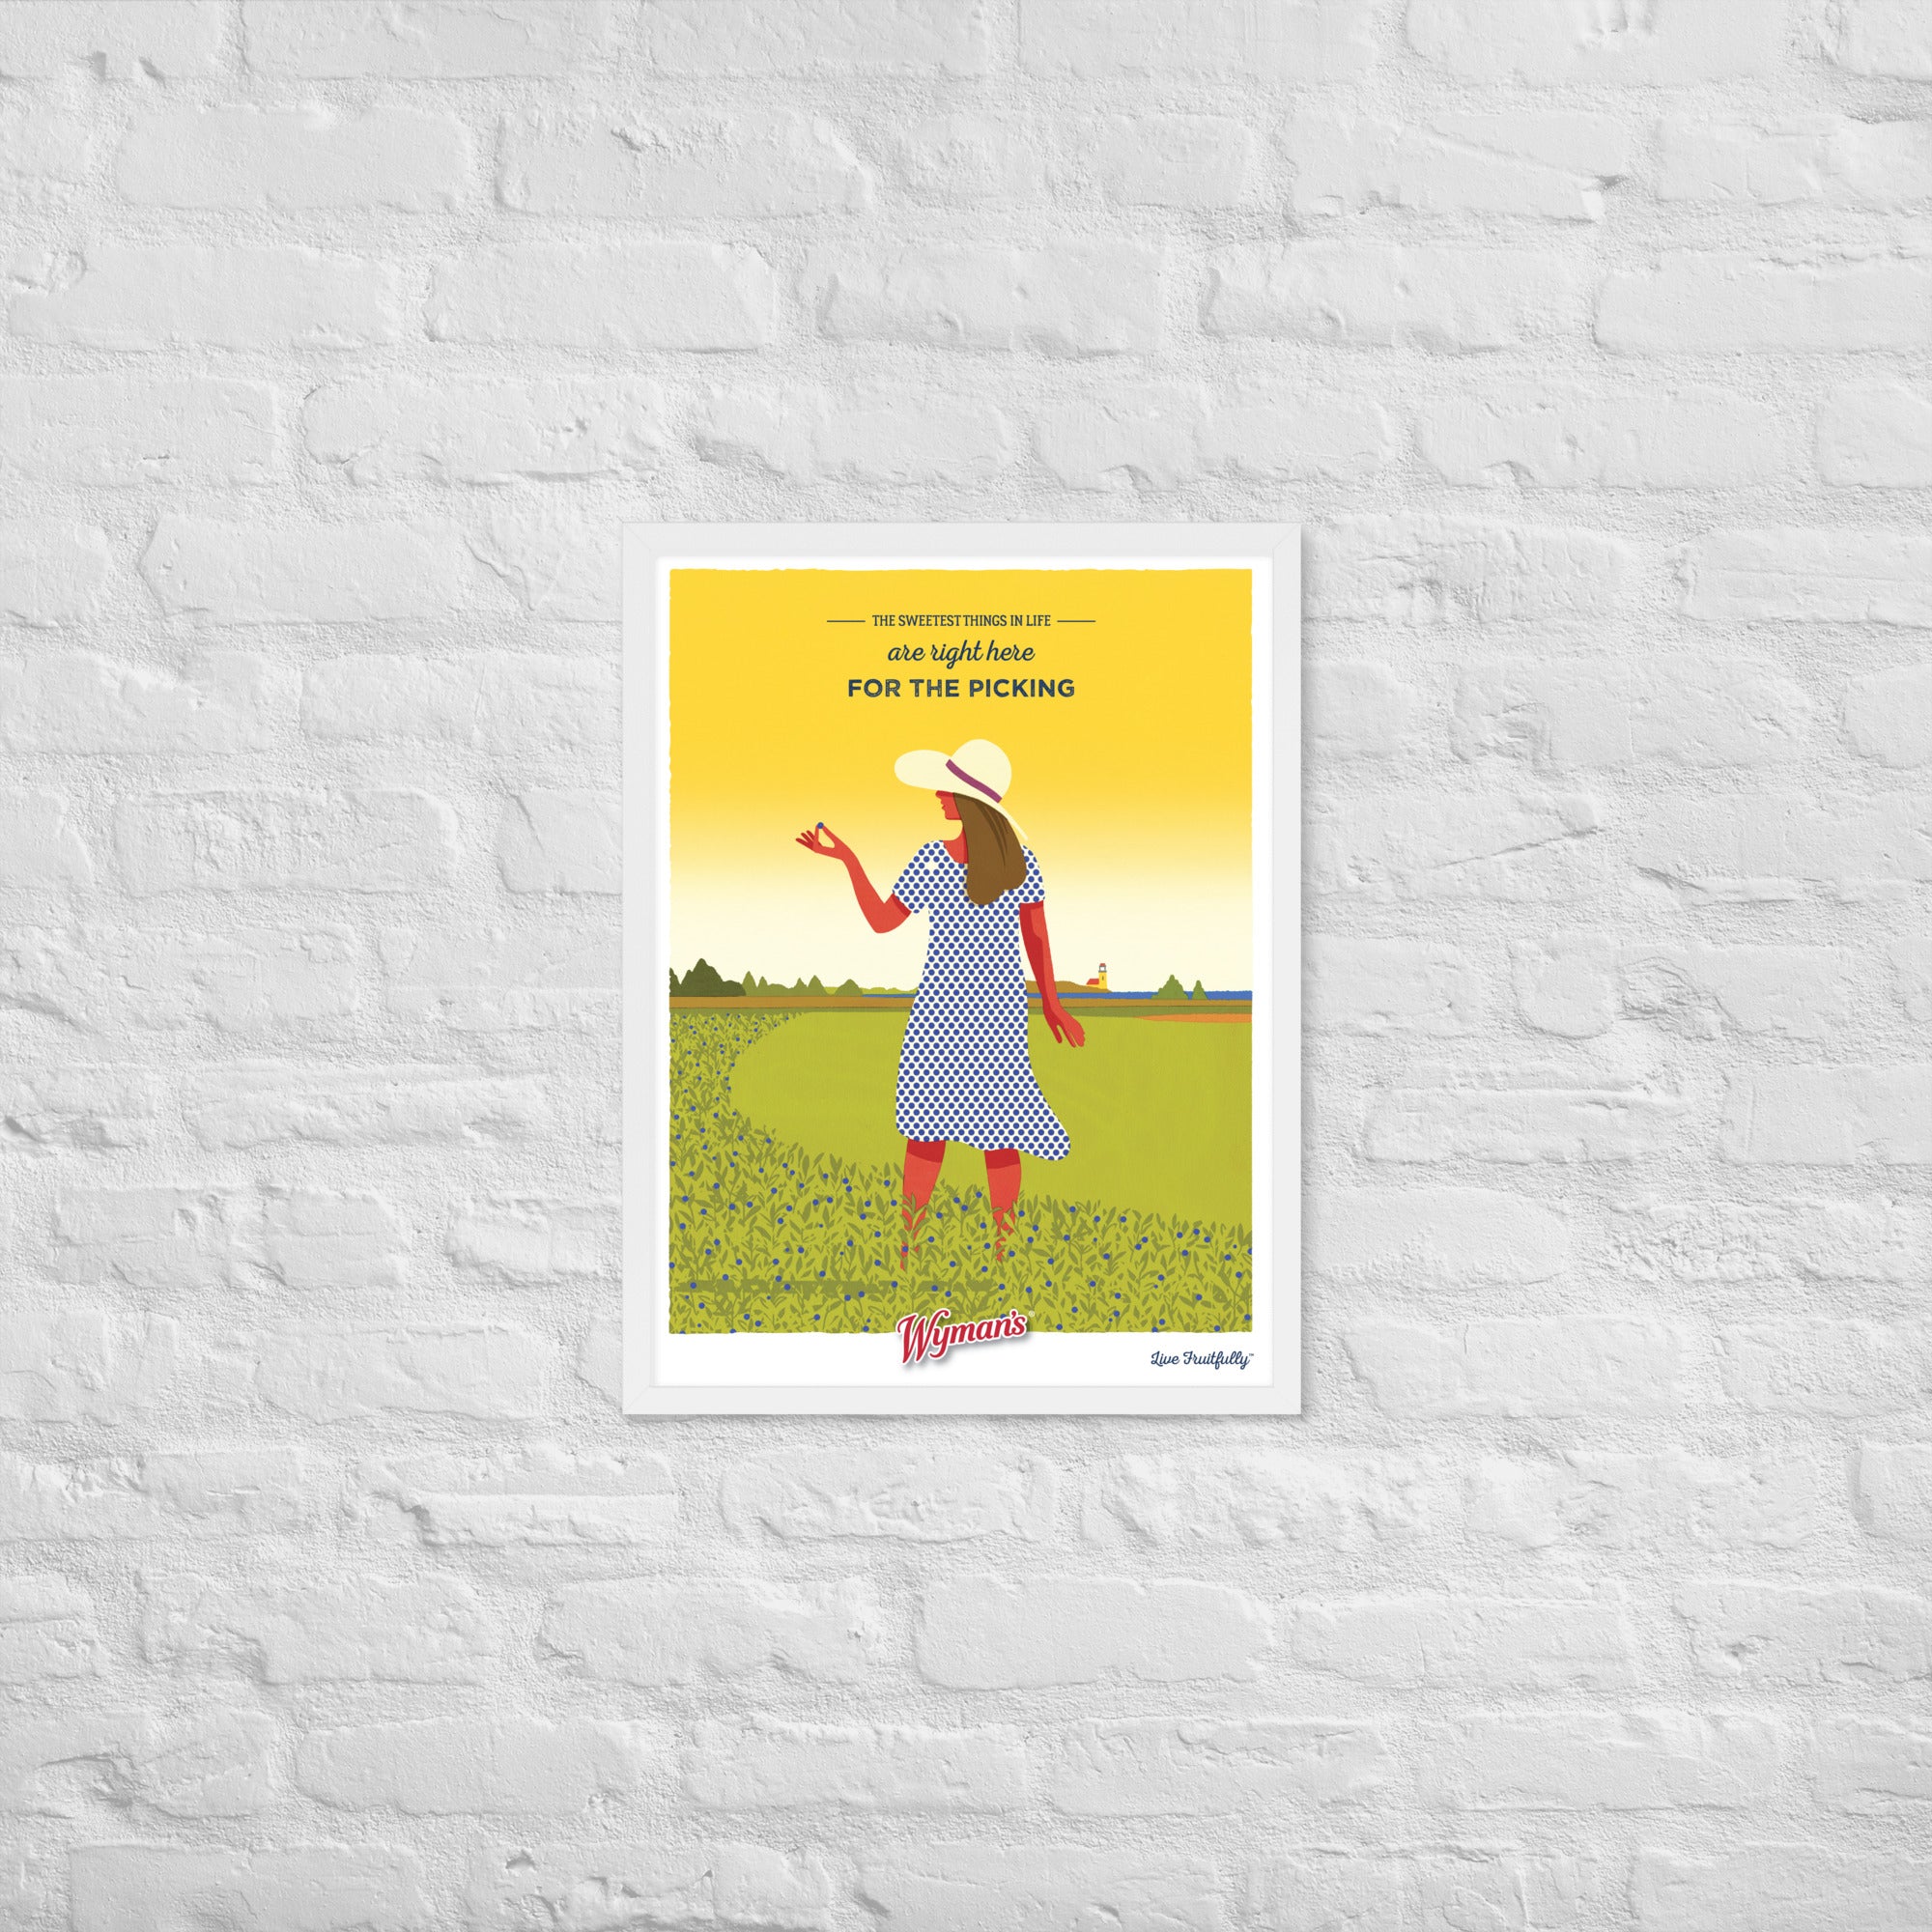 A Shop Wyman's "The Sweetest Things in Life are Right Here for the Picking" poster with a custom printing finish, featuring a woman in a hat in front of a brick wall.